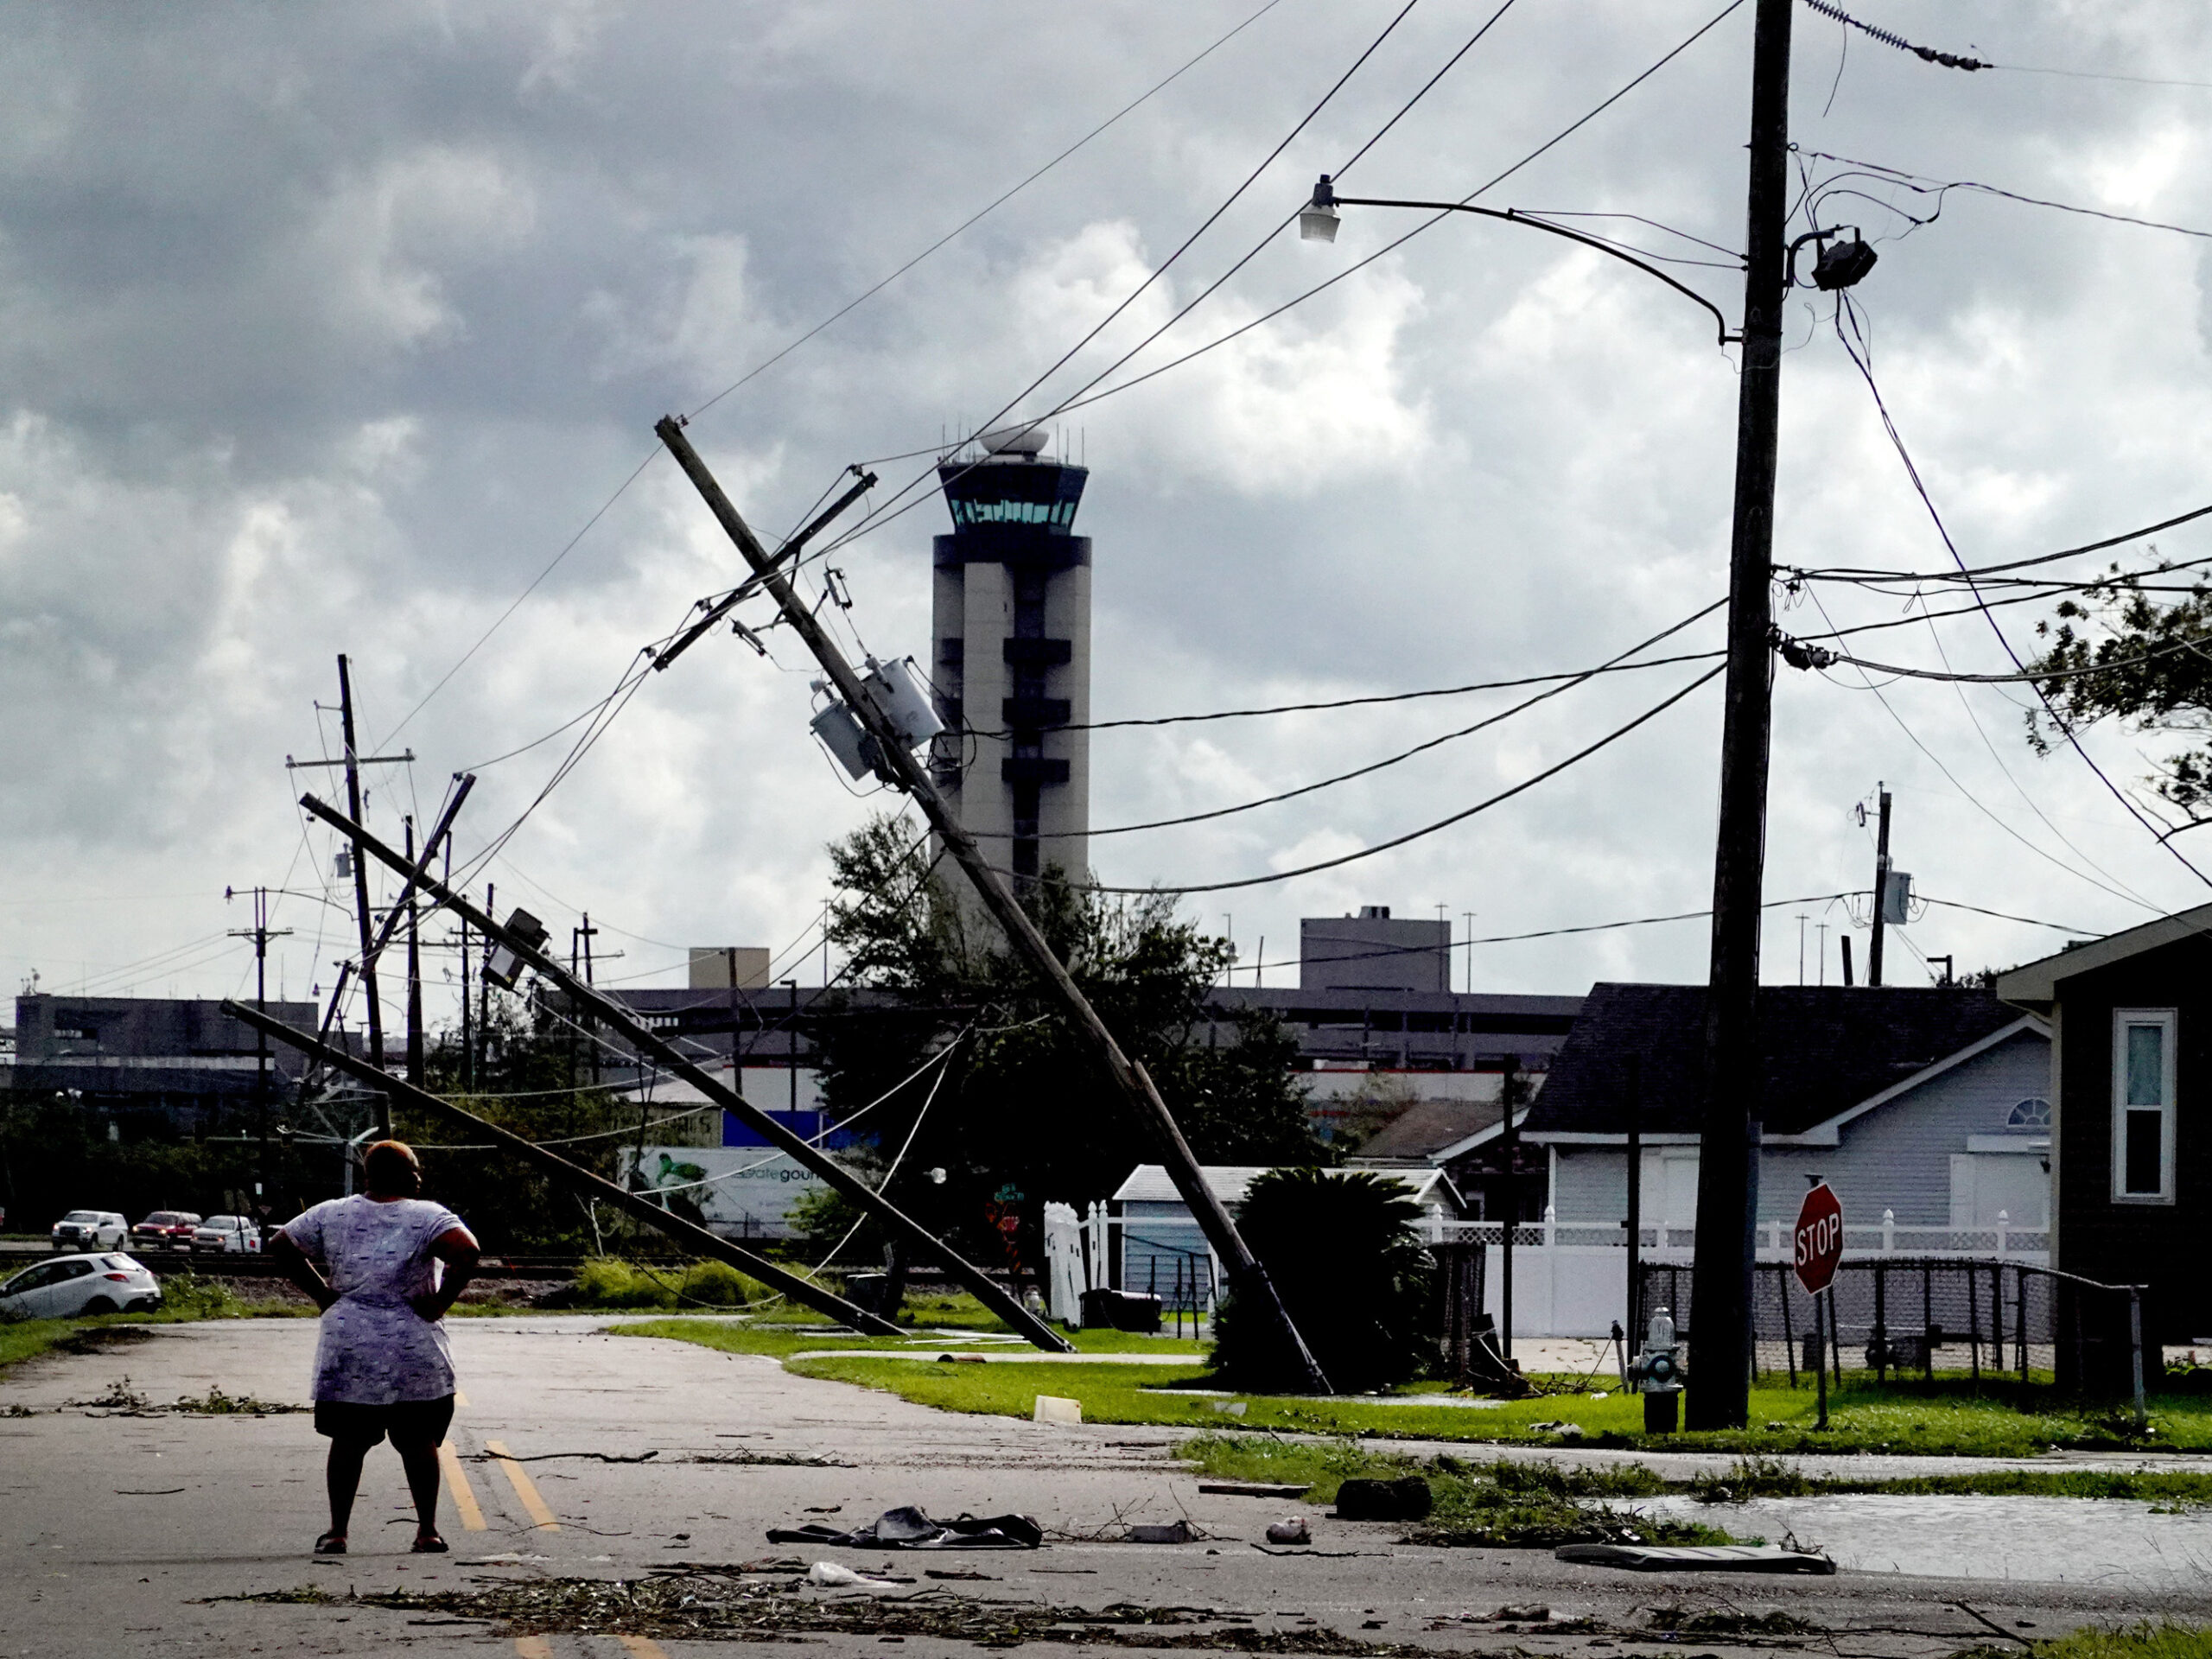 A woman stands in the middle of a street, looking at destruction, including fallen electric wires.